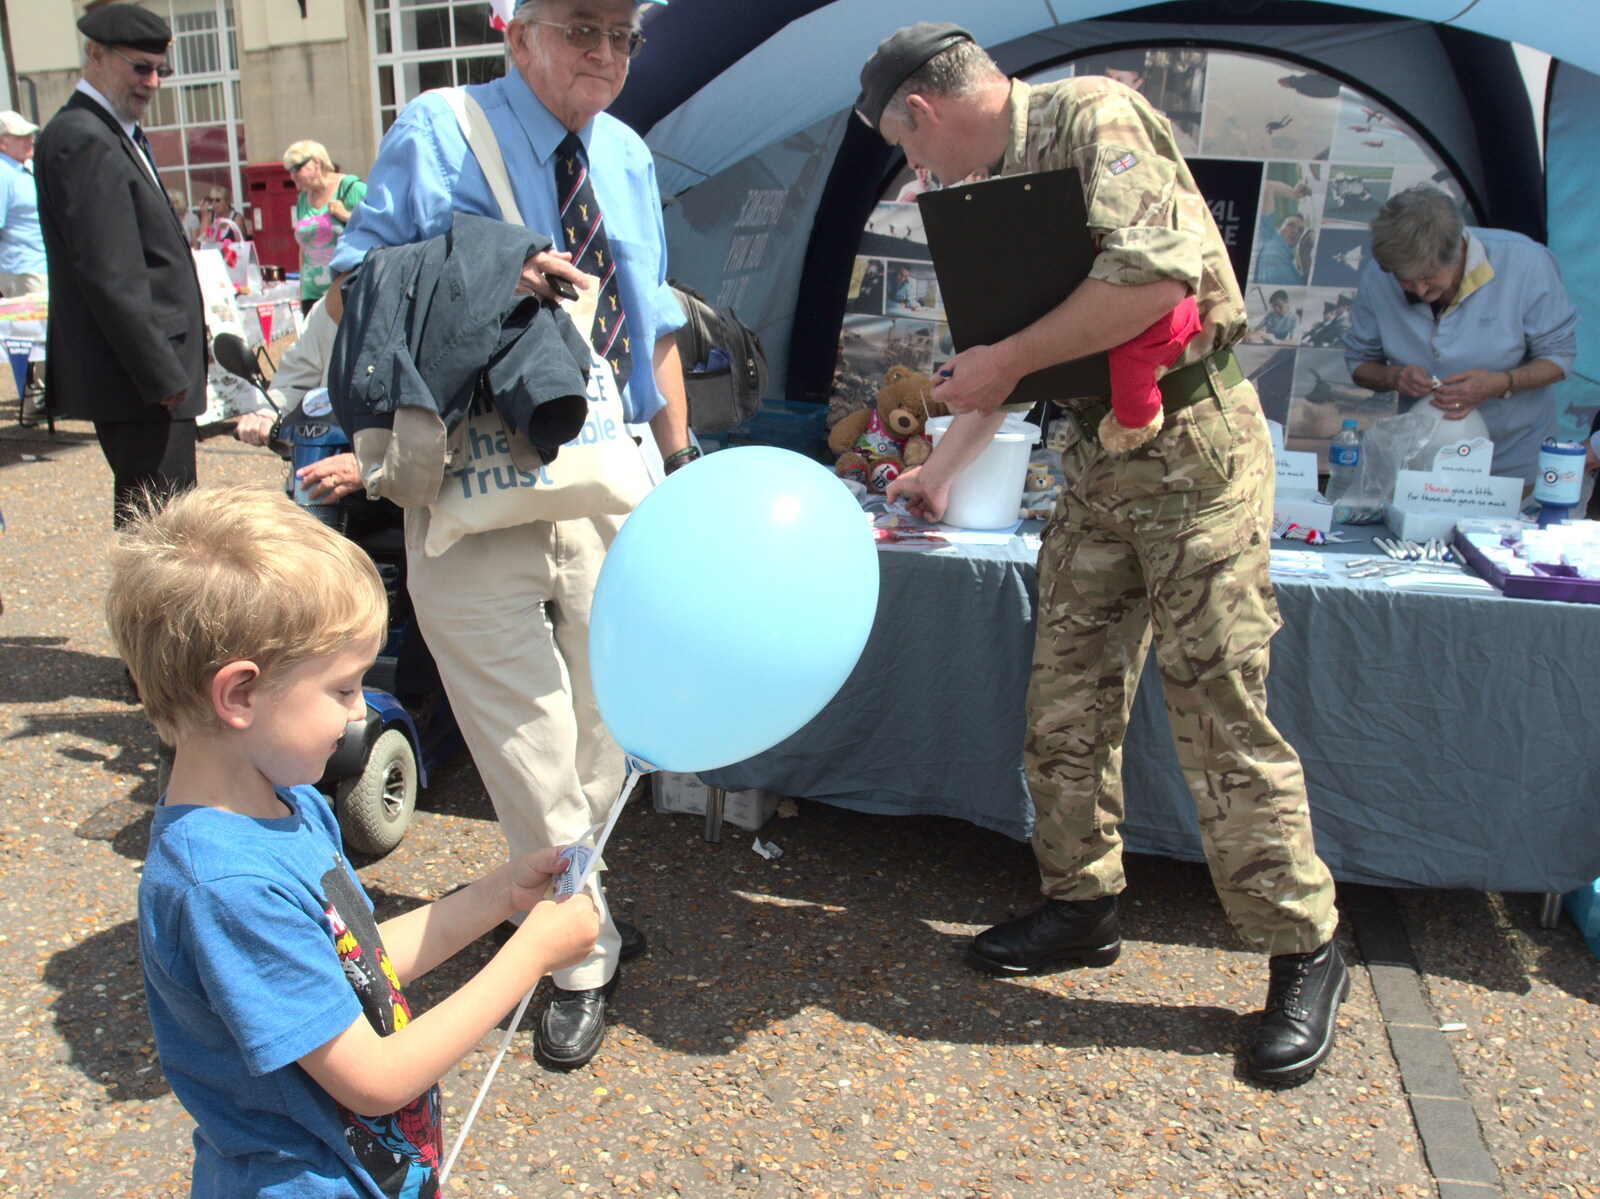 Fred gets a balloon from A Busy Day and a Church Fair, Diss, Norfolk - 28th June 2014